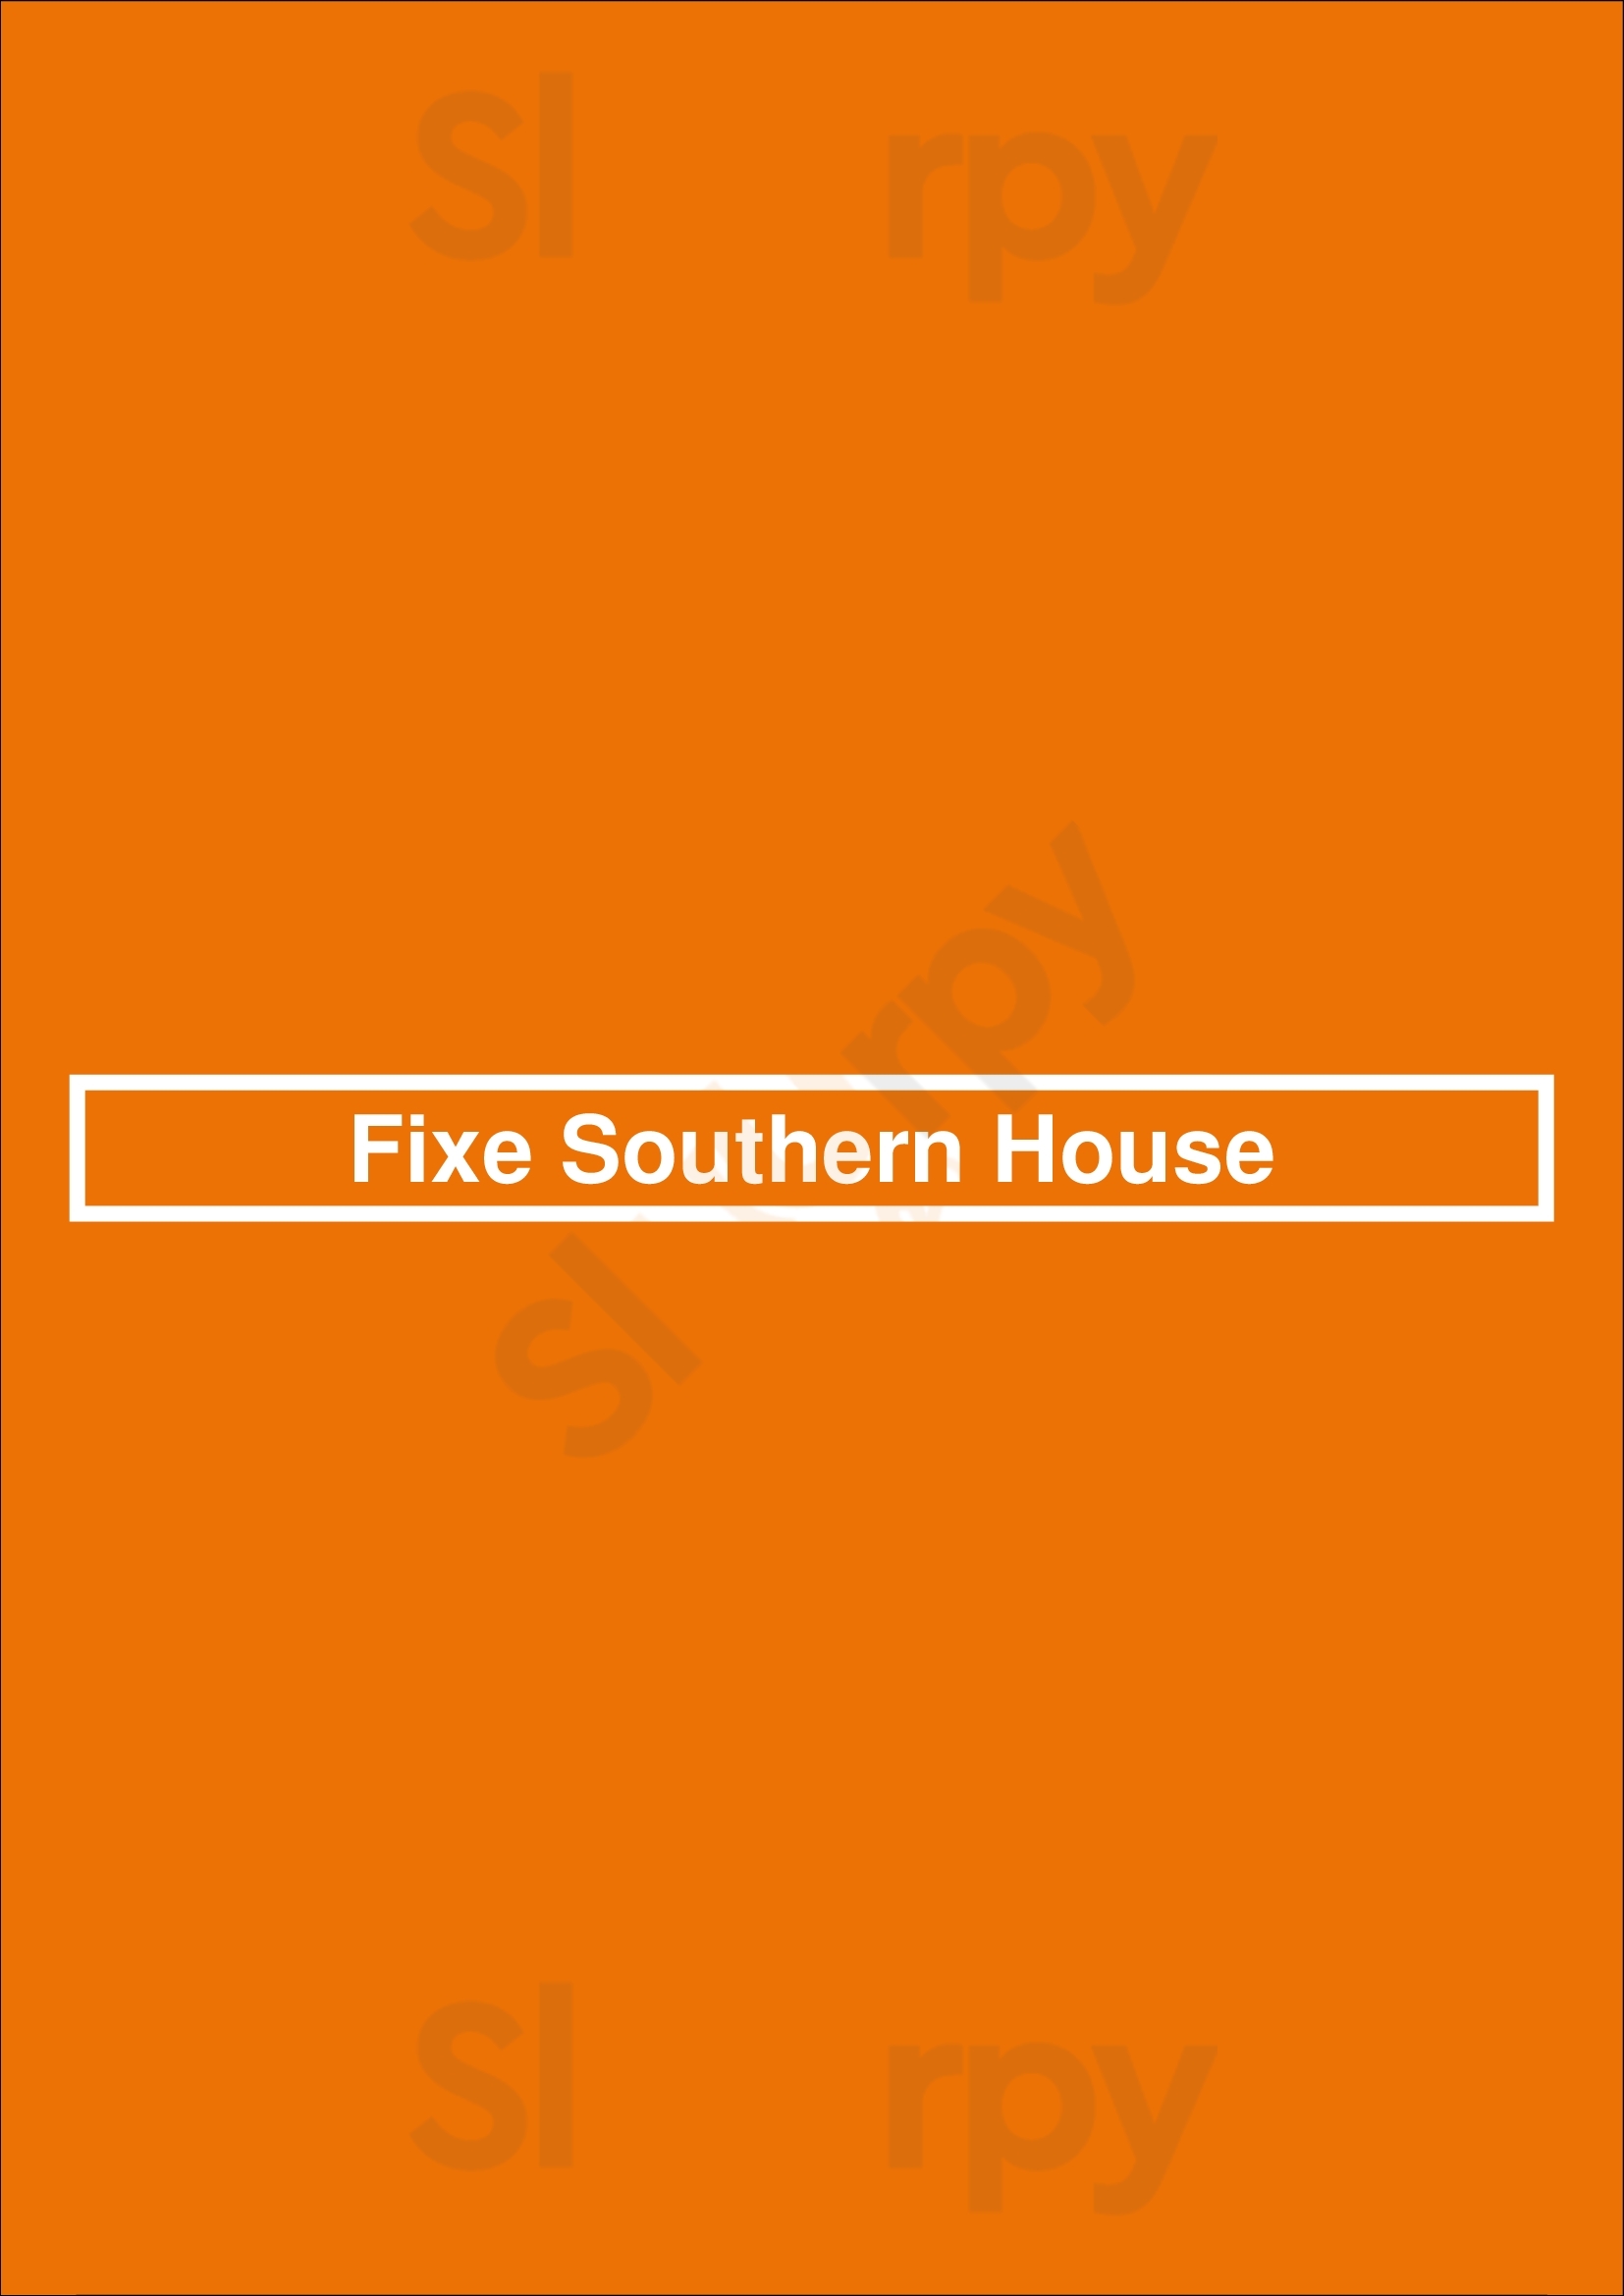 Fixe Southern House Fort Worth Menu - 1